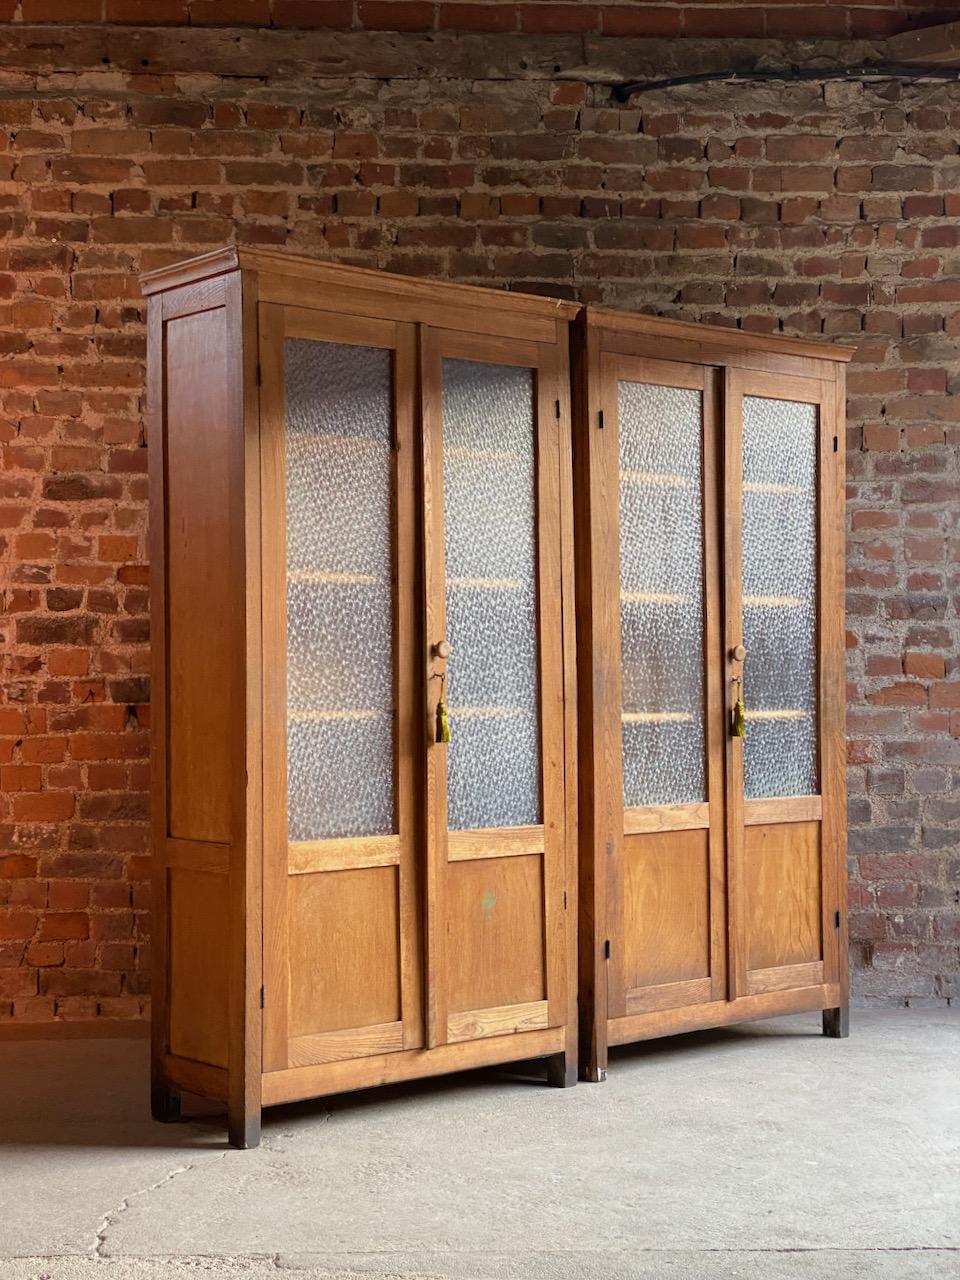 Glass Apothecary Haberdashery Cabinet circa 1930s Numbers 2, 4, 5